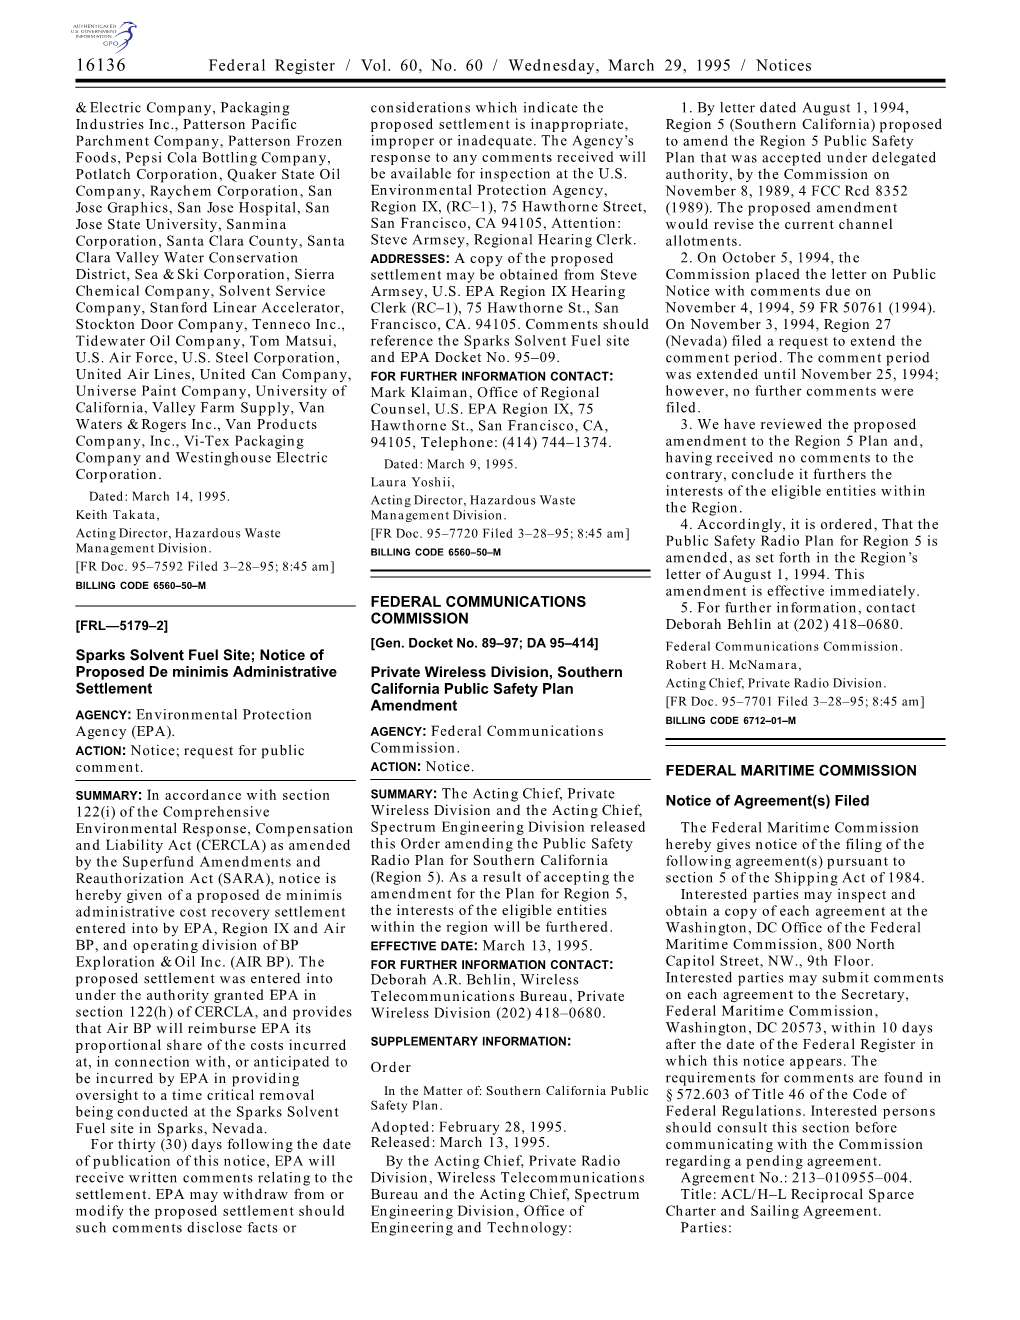 Federal Register / Vol. 60, No. 60 / Wednesday, March 29, 1995 / Notices